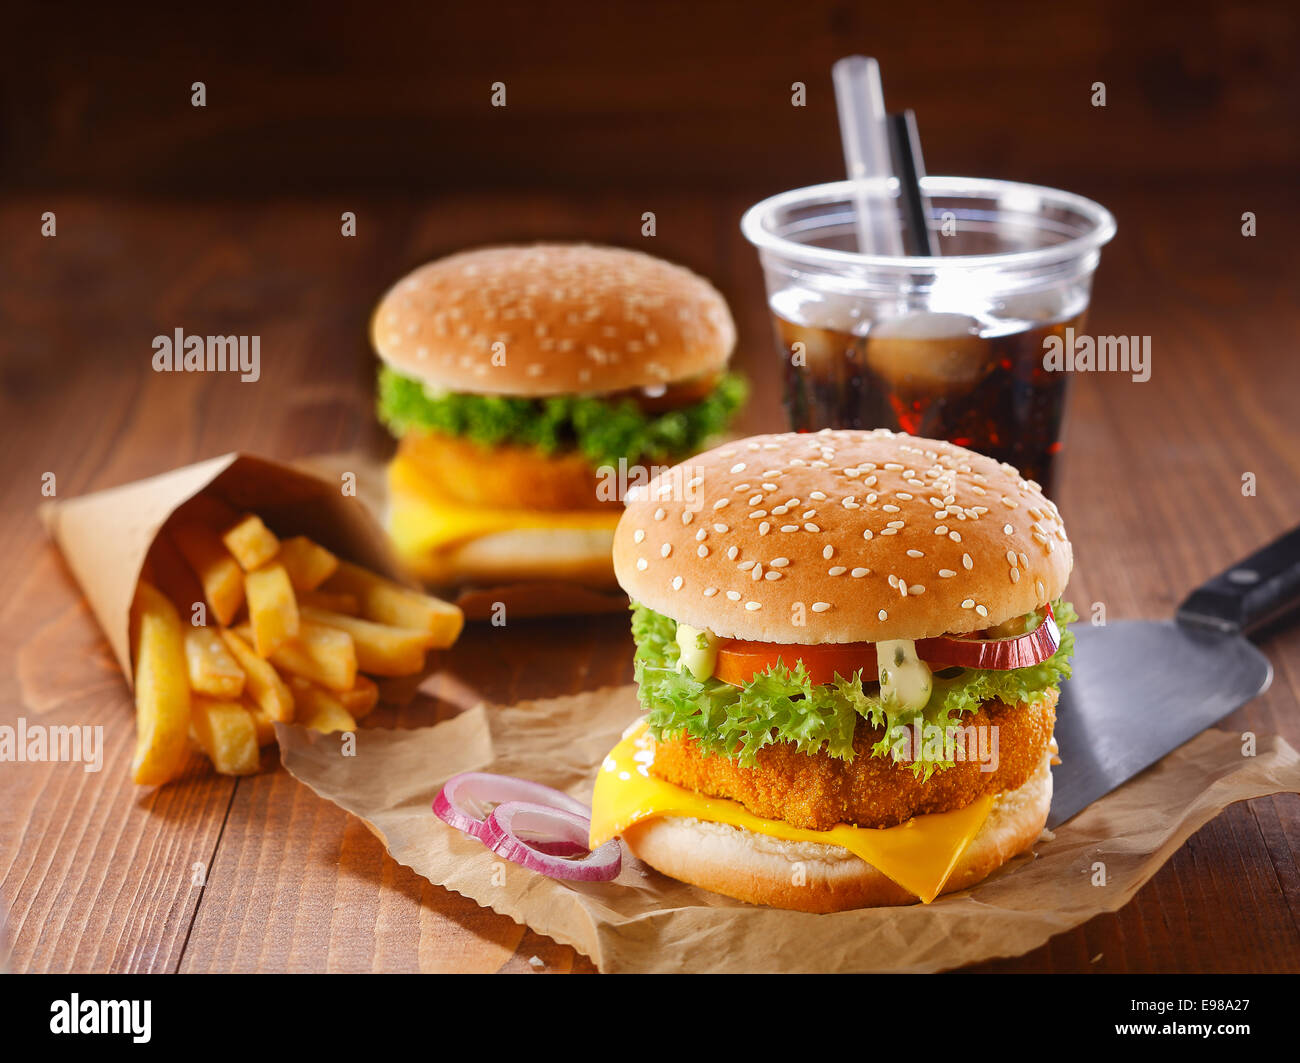 Fastfood meal made of two hamburgers, fried potatoes and soda with ice Stock Photo